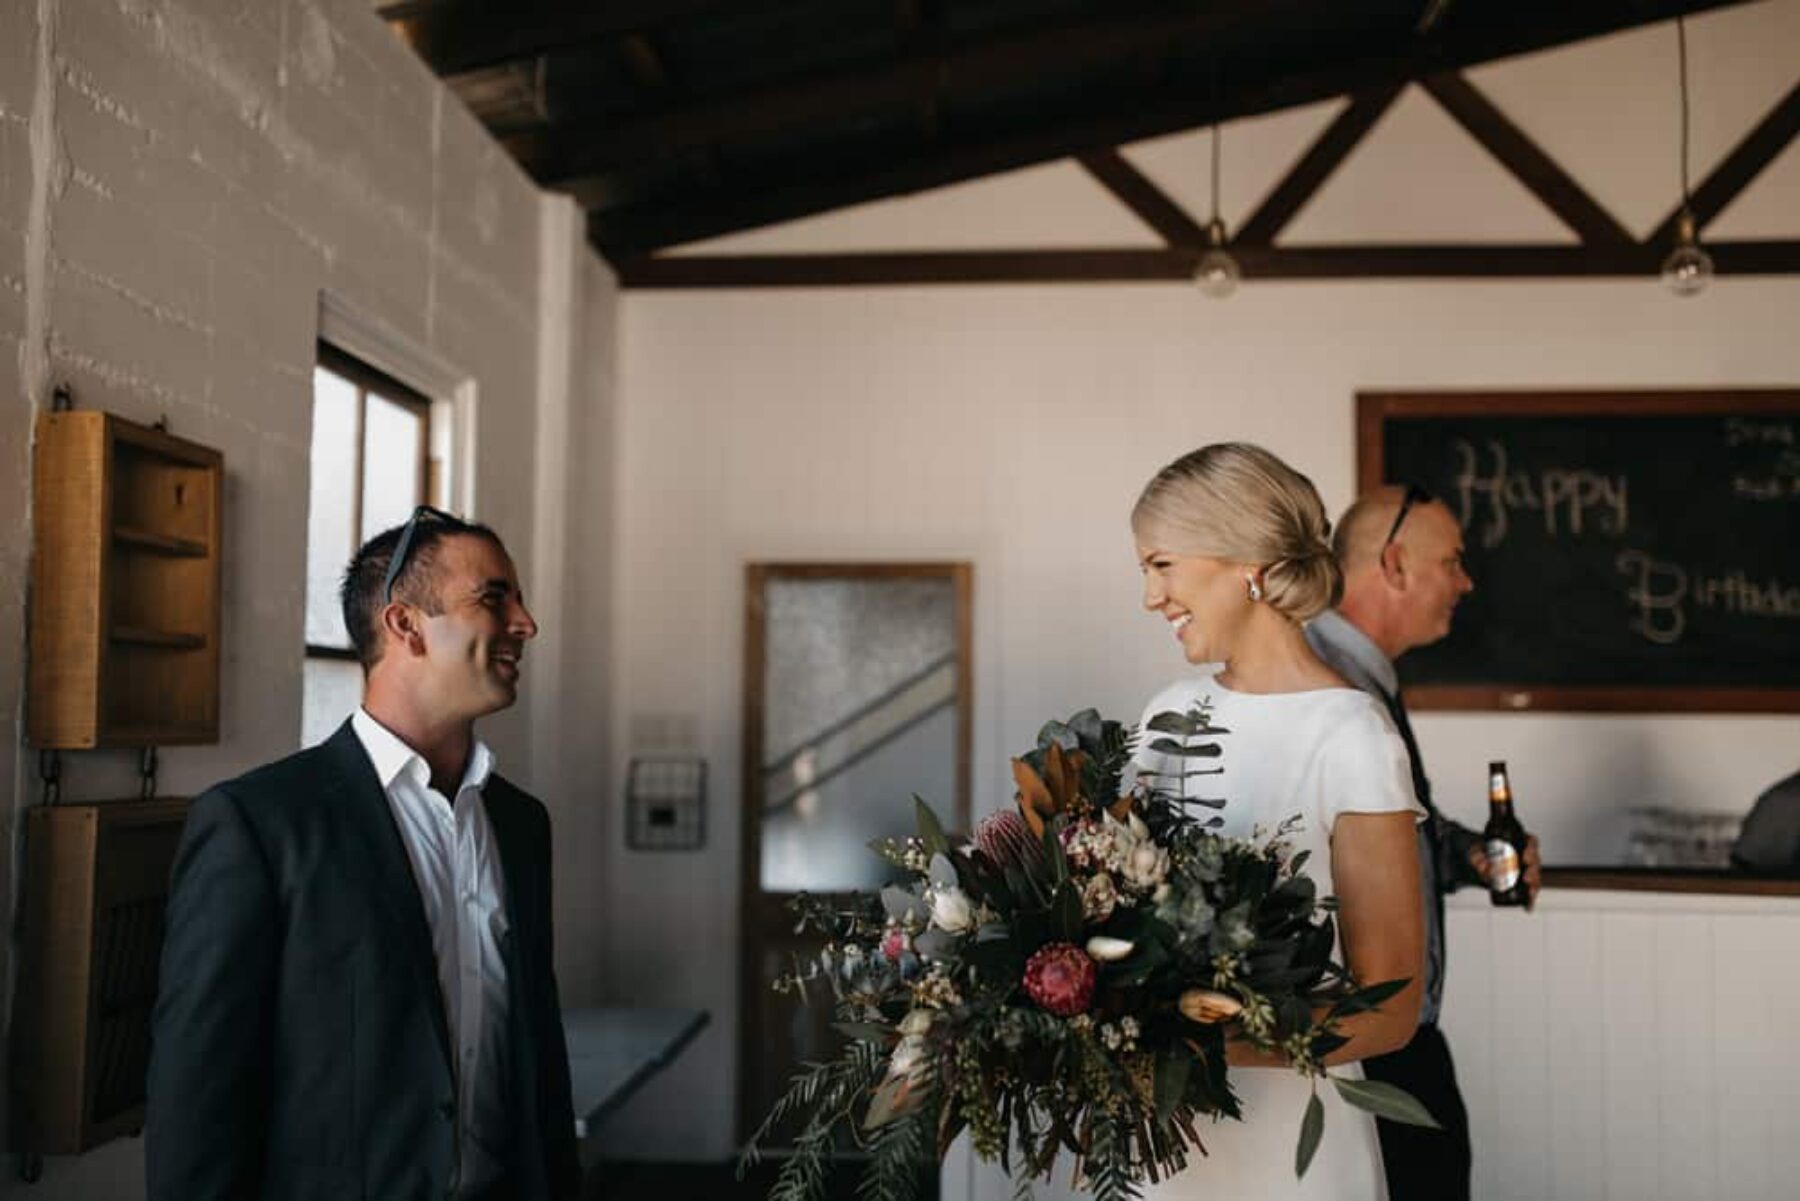 Modern Townsville warehouse wedding - photography by SB Creative Co.